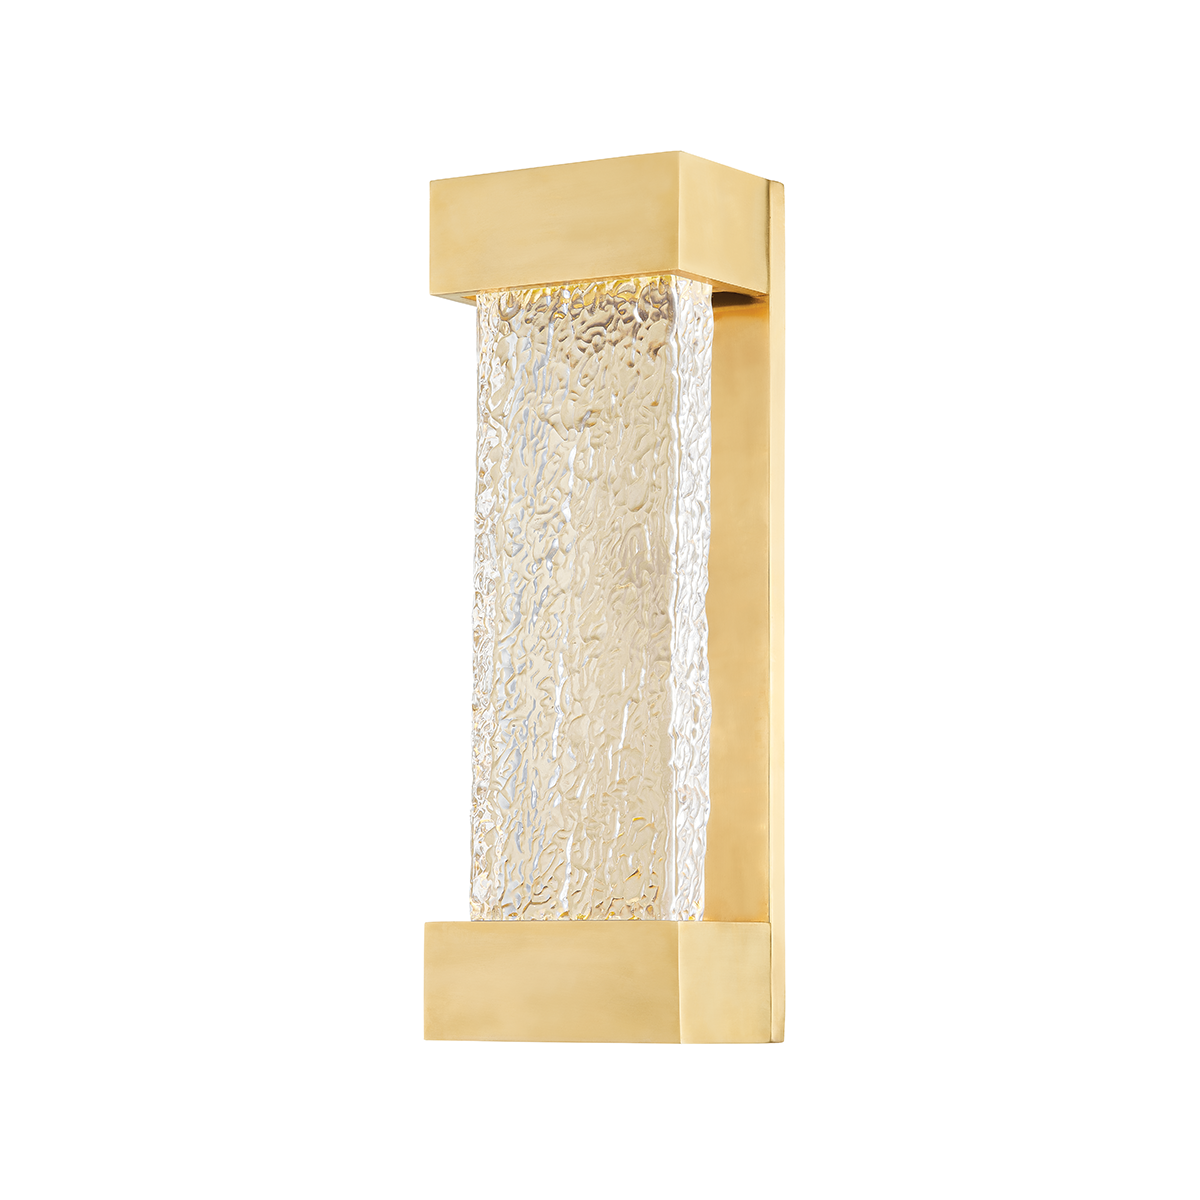 LED Aged Brass Frame with Piastra Glass Diffuser Wall Sconce